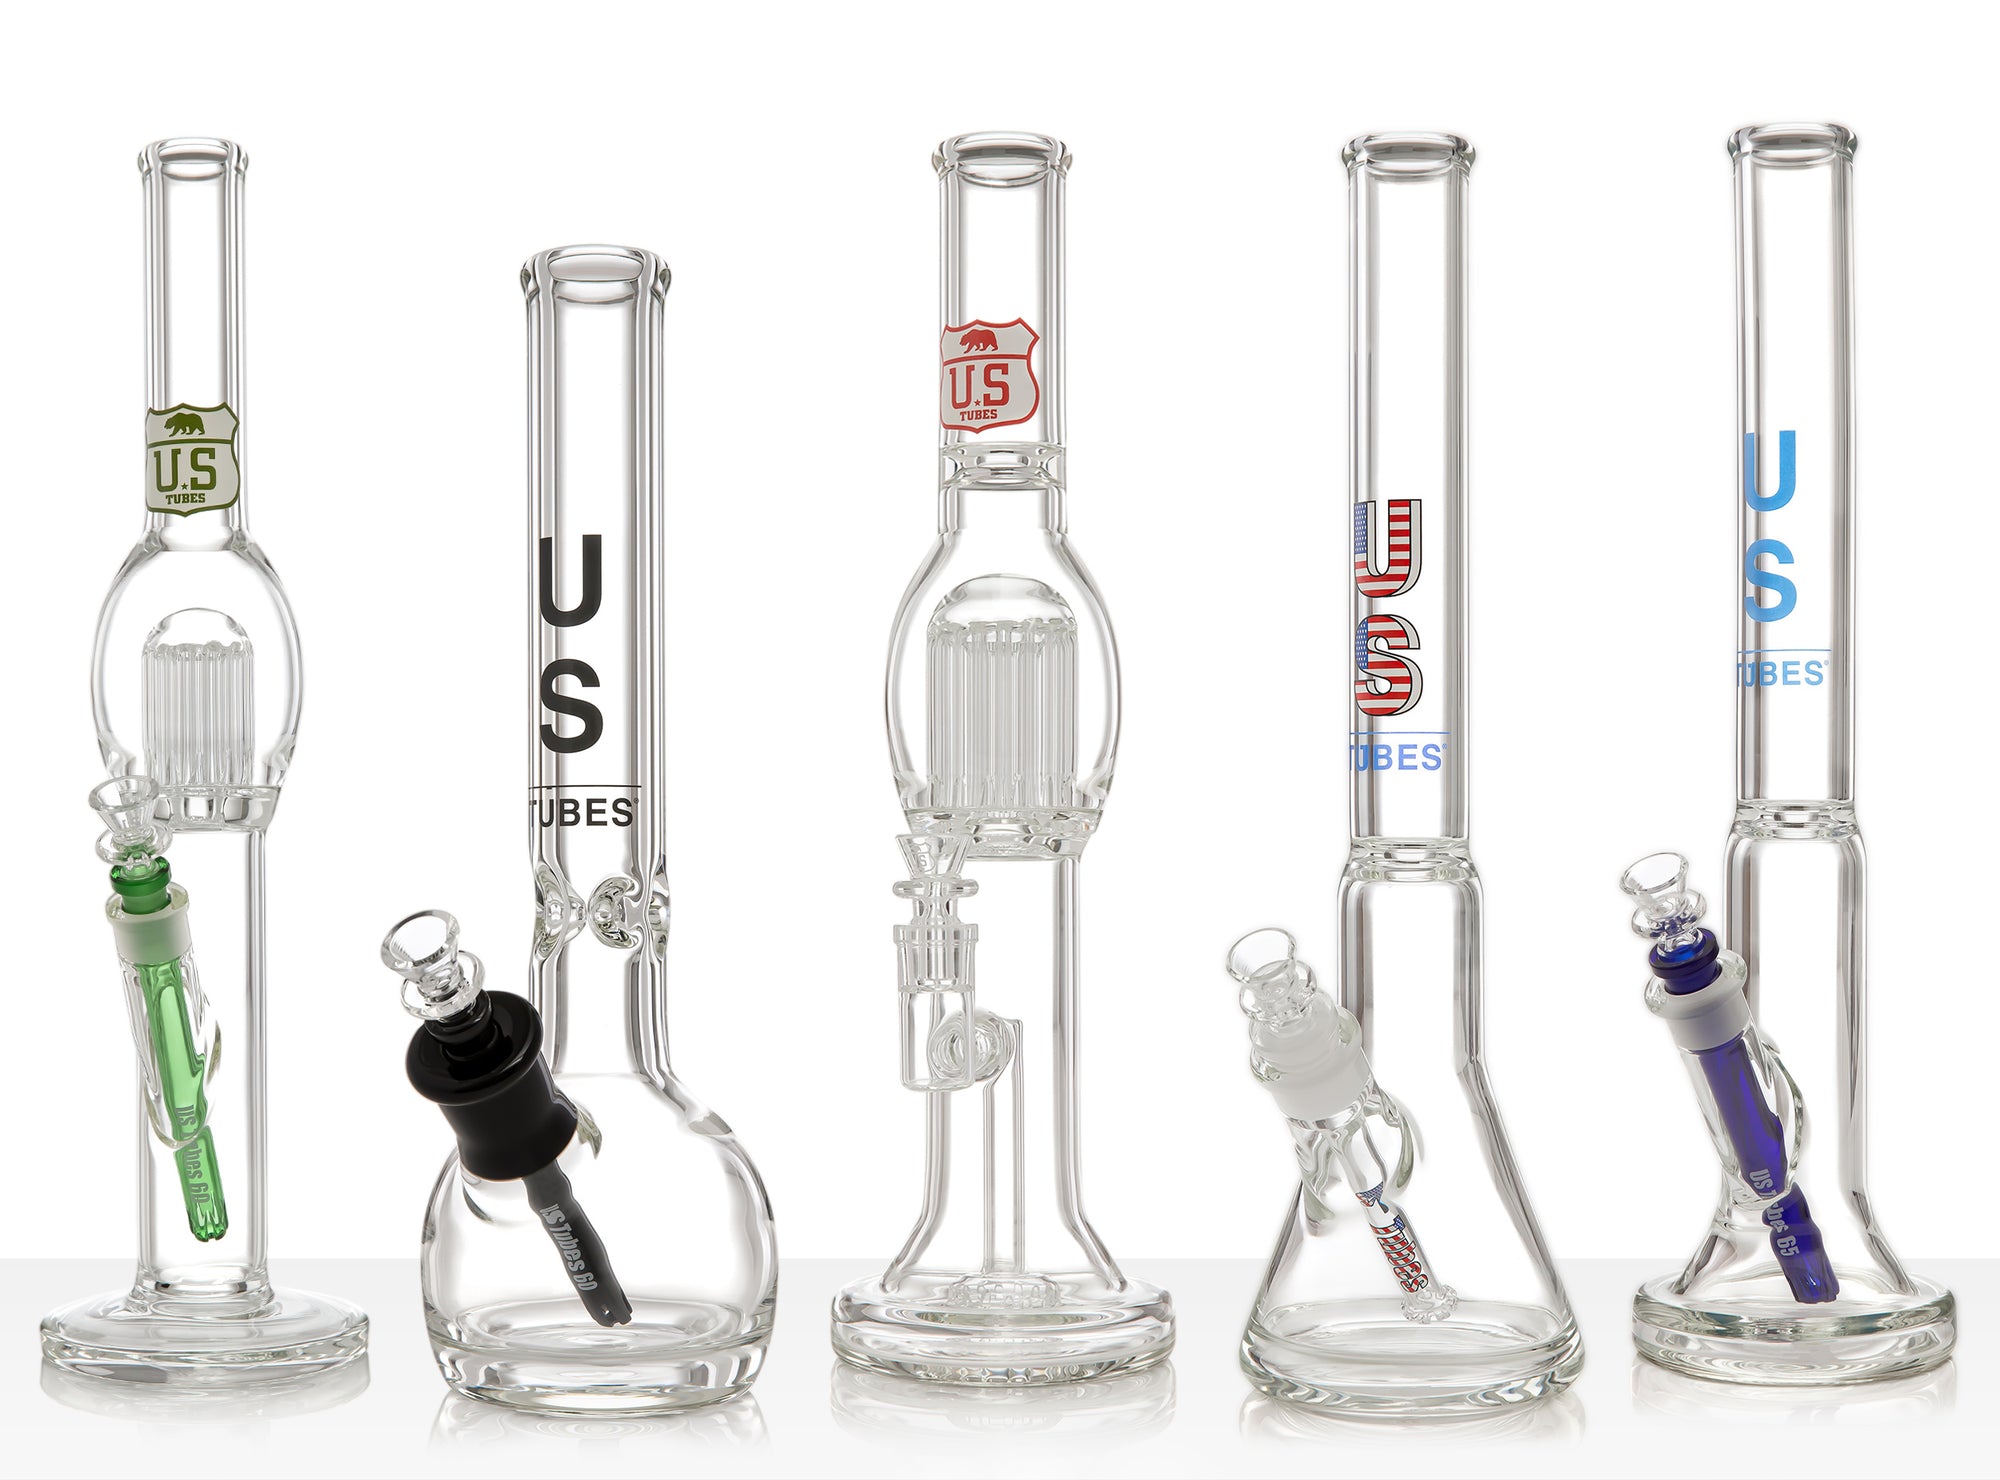 US TUBES Home Page Banner Showing Five Water Pipes